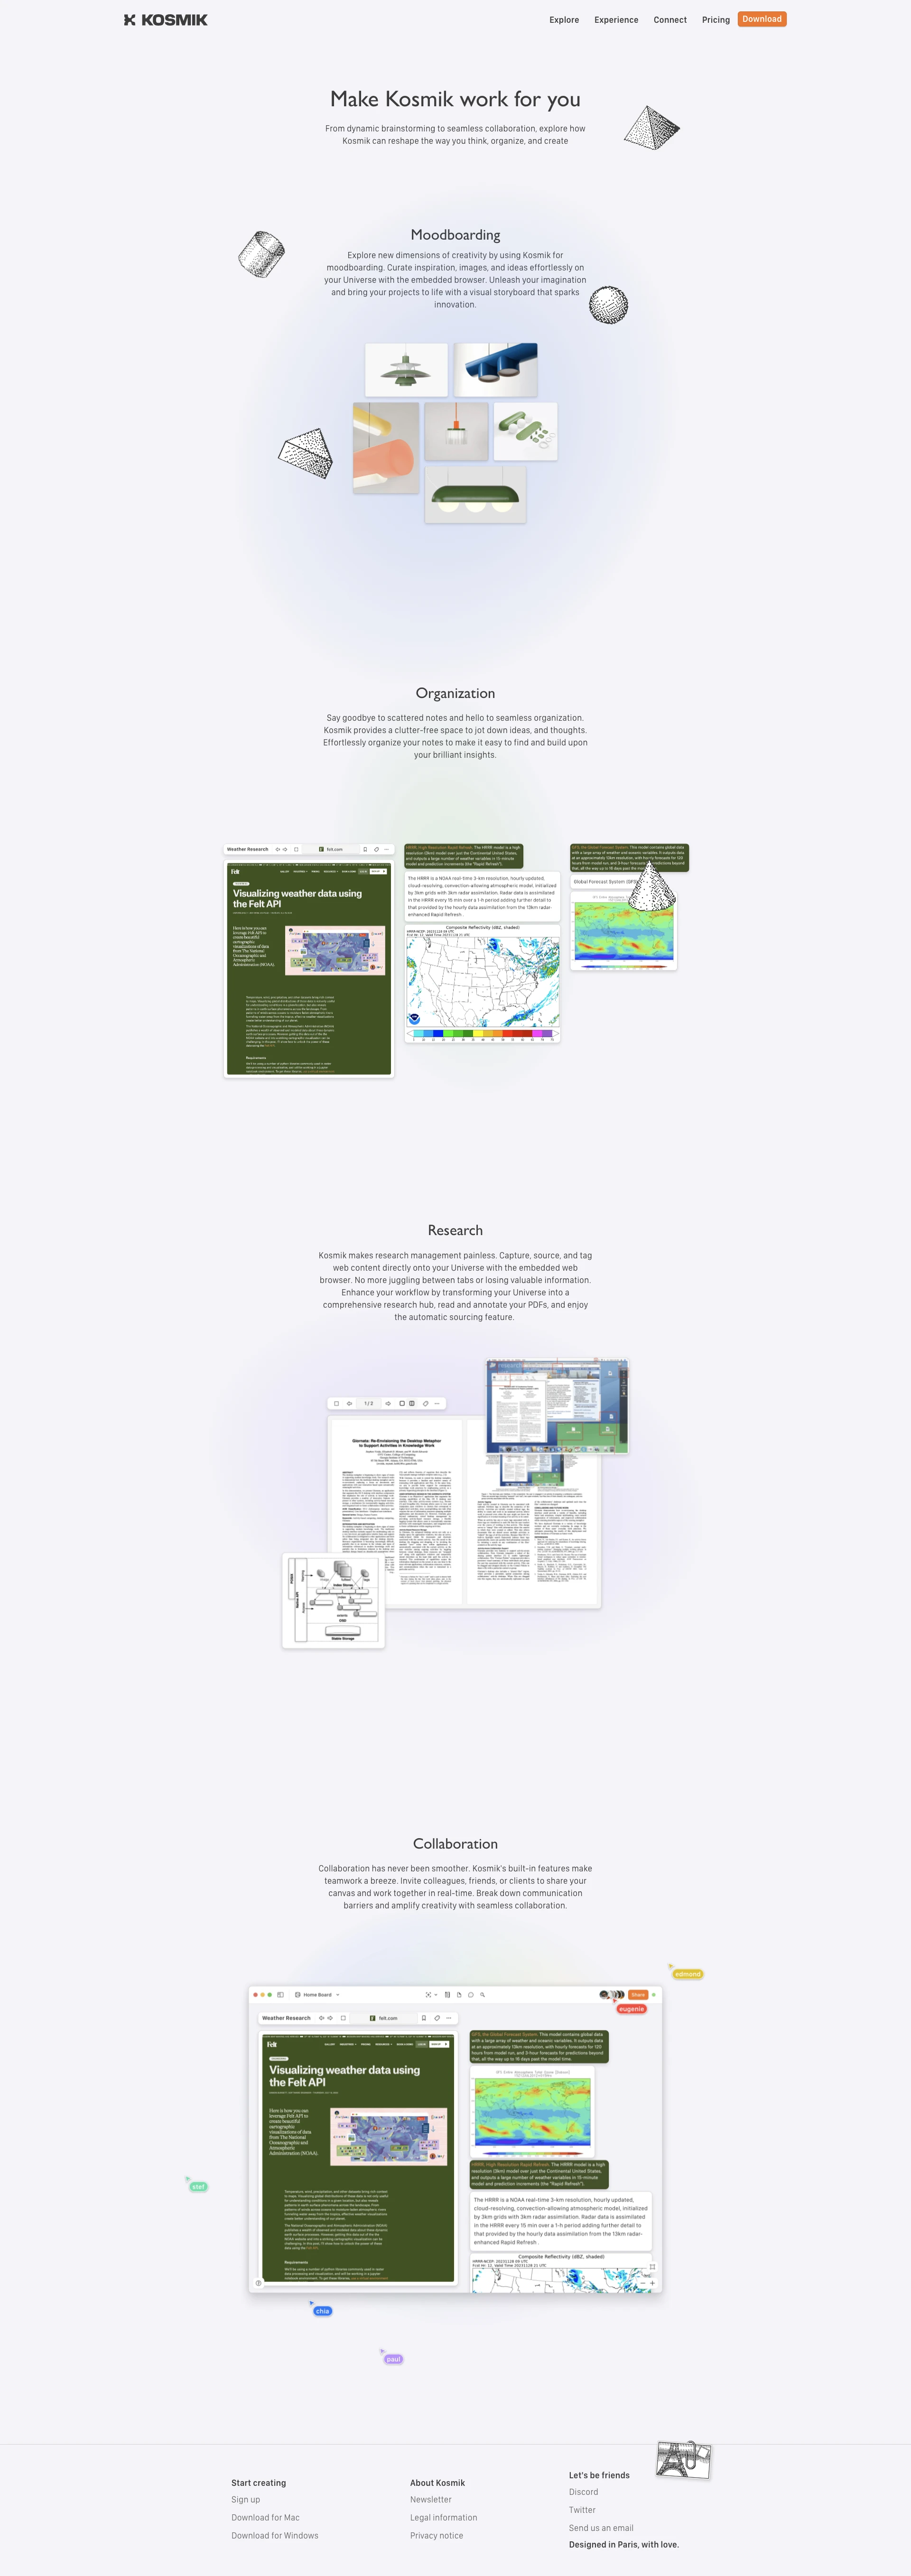 Kosmik Landing Page Example: Kosmik is the visual canvas for knowledge management. Kosmik allows you to write, create large media collections, browse the web and share it all with your team! No more folders, bookmarks or infinite message threads.